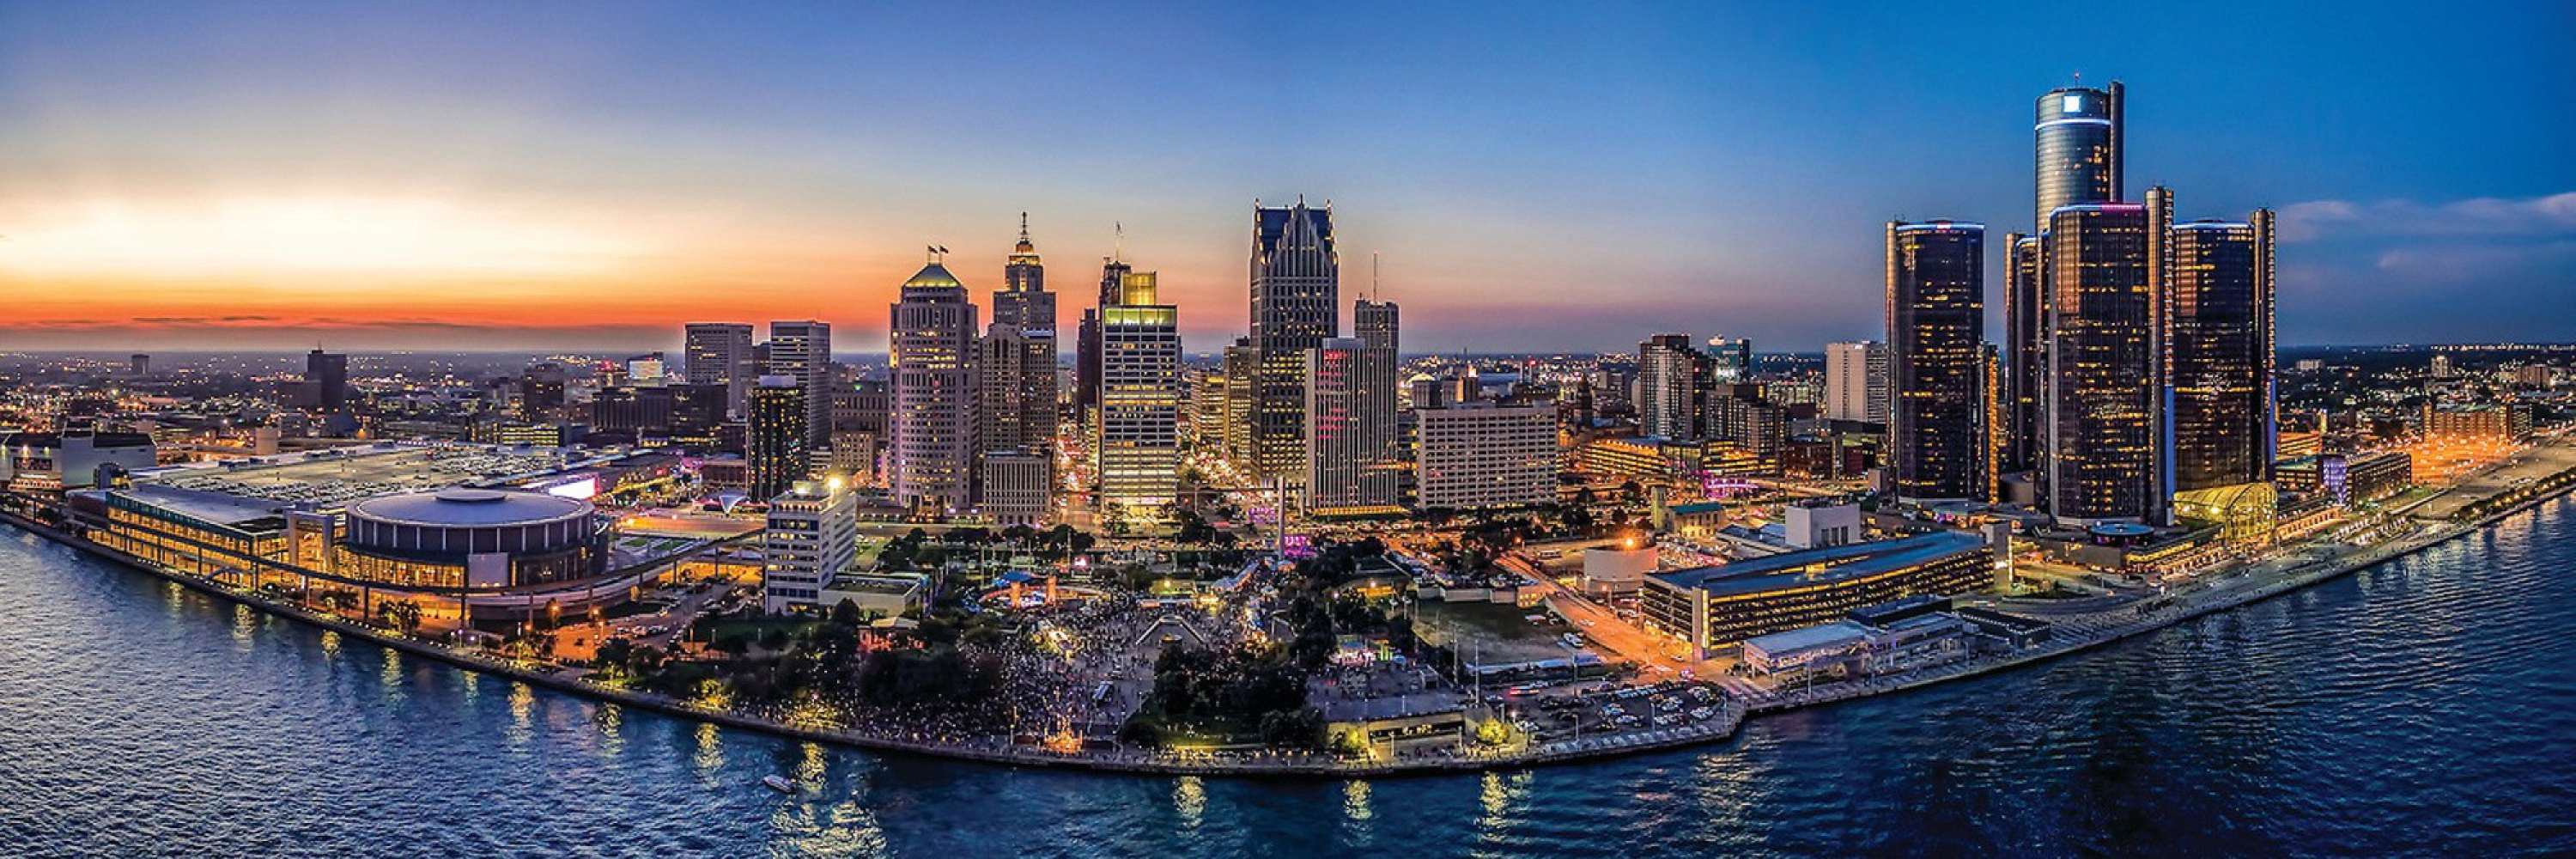 Staffing Services in Detroit, MI | Find Healthcare Jobs and Employees